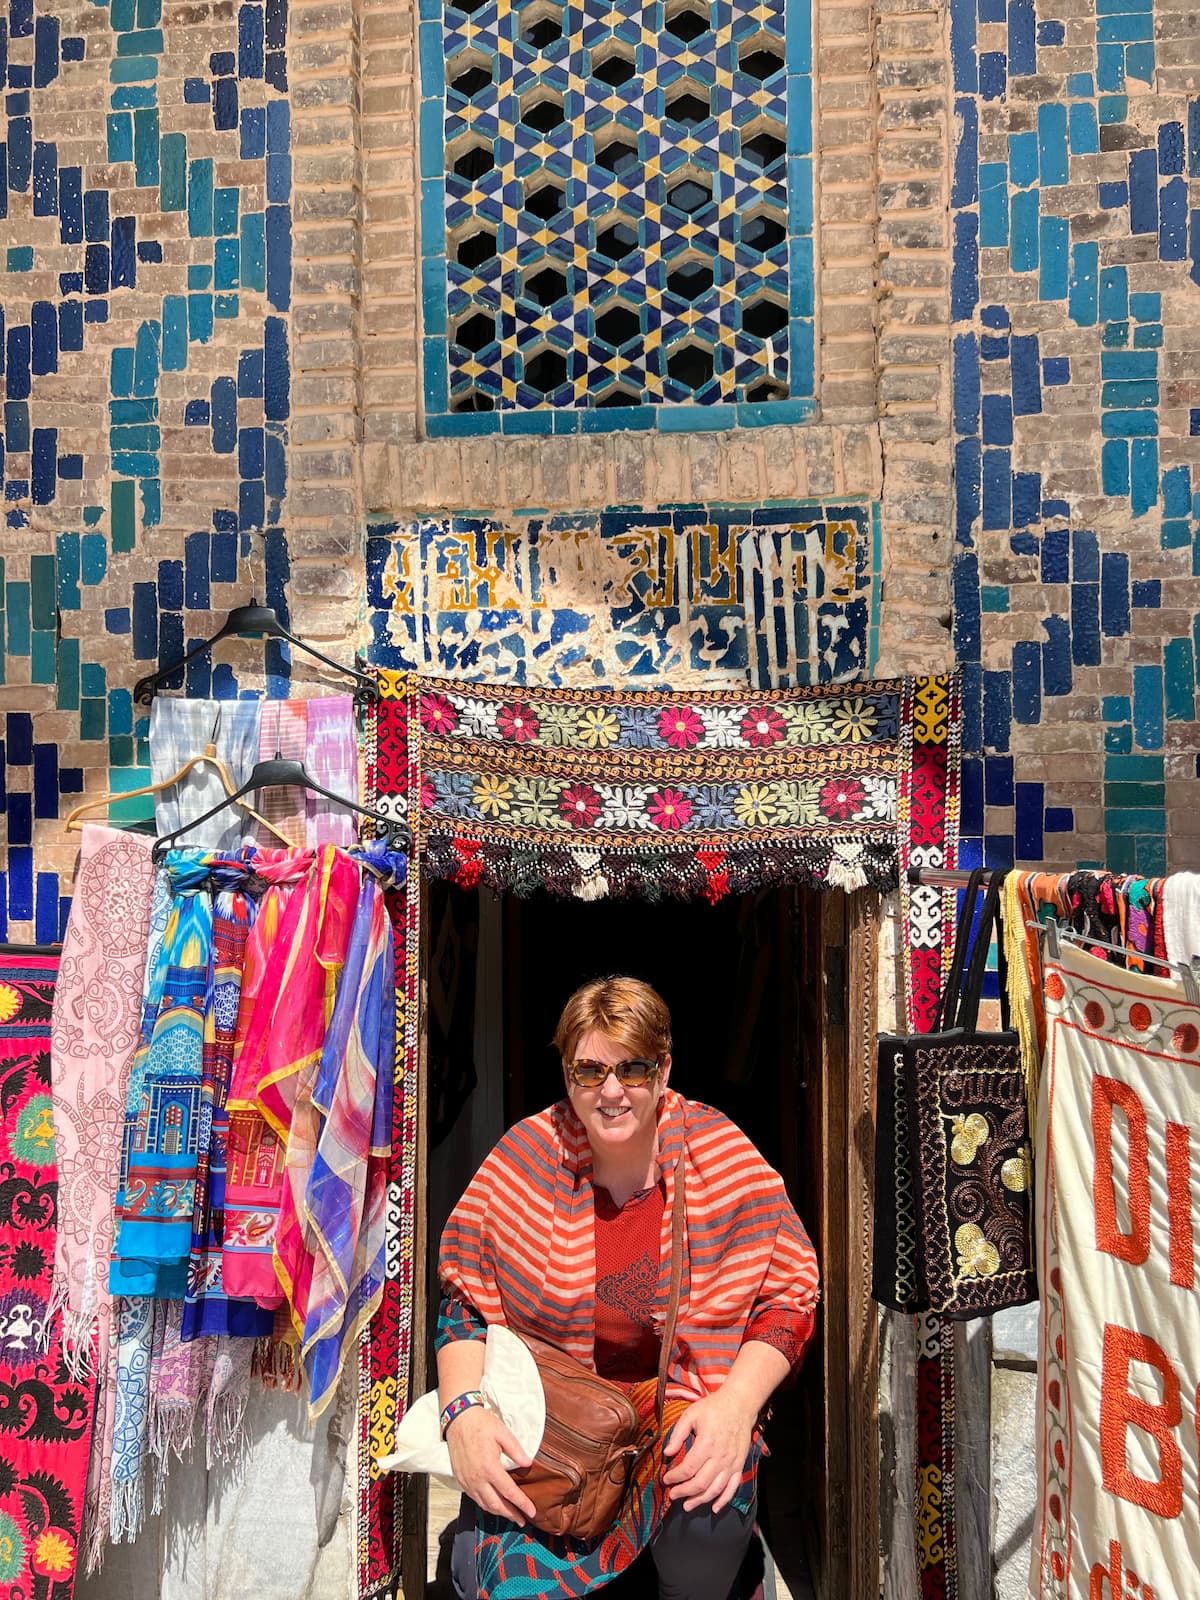 tour guide Nicole standing in a textile stall